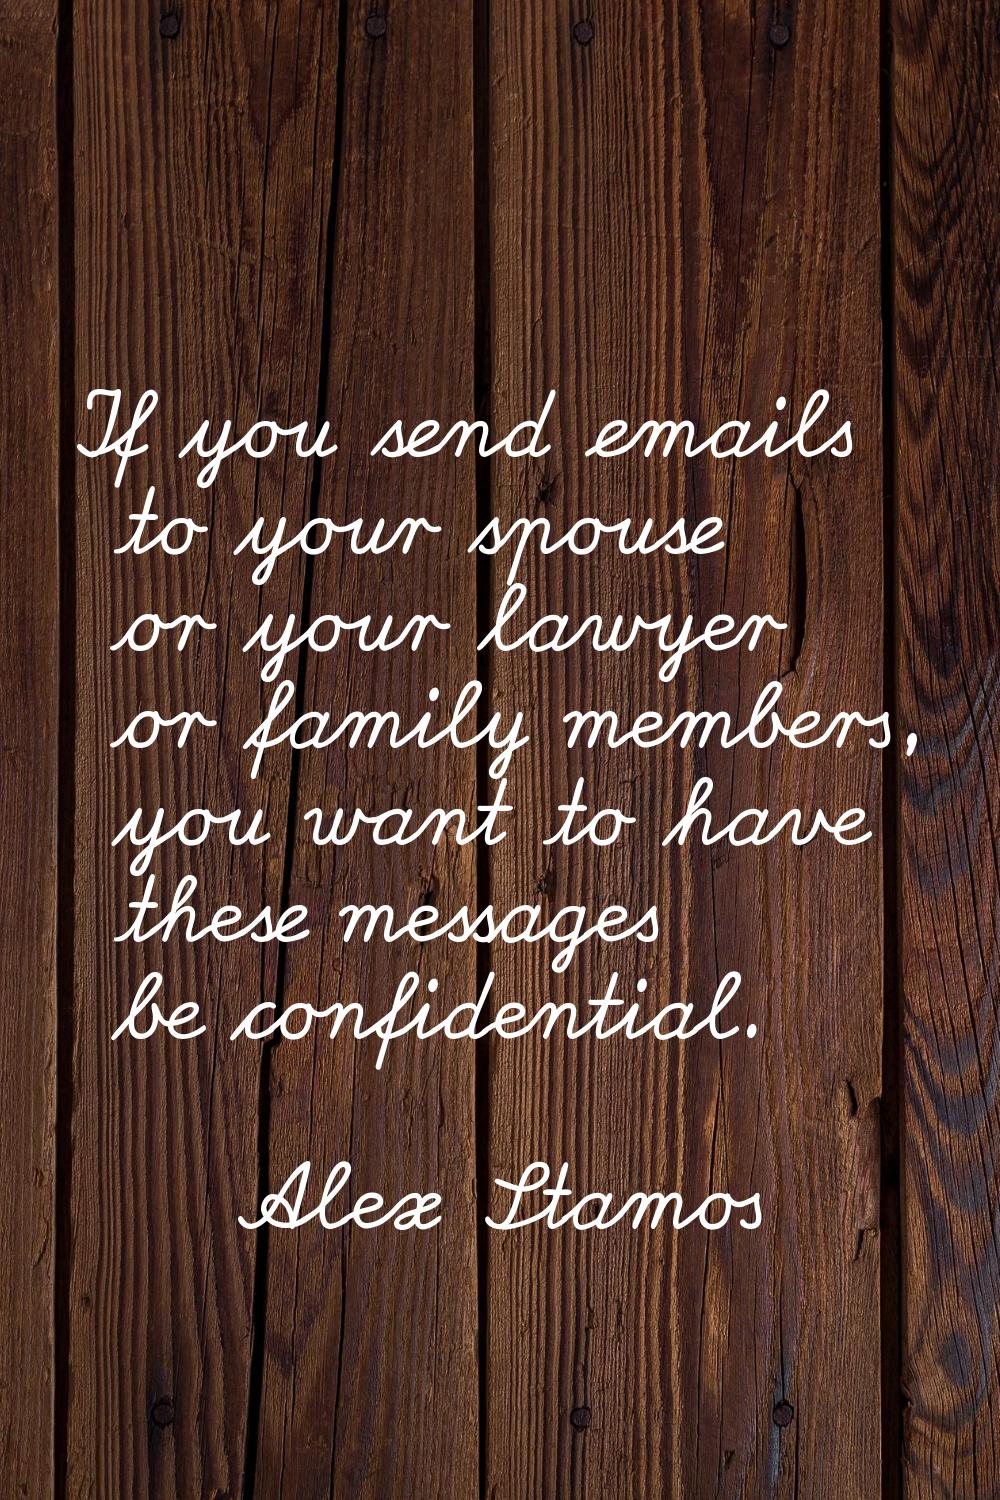 If you send emails to your spouse or your lawyer or family members, you want to have these messages